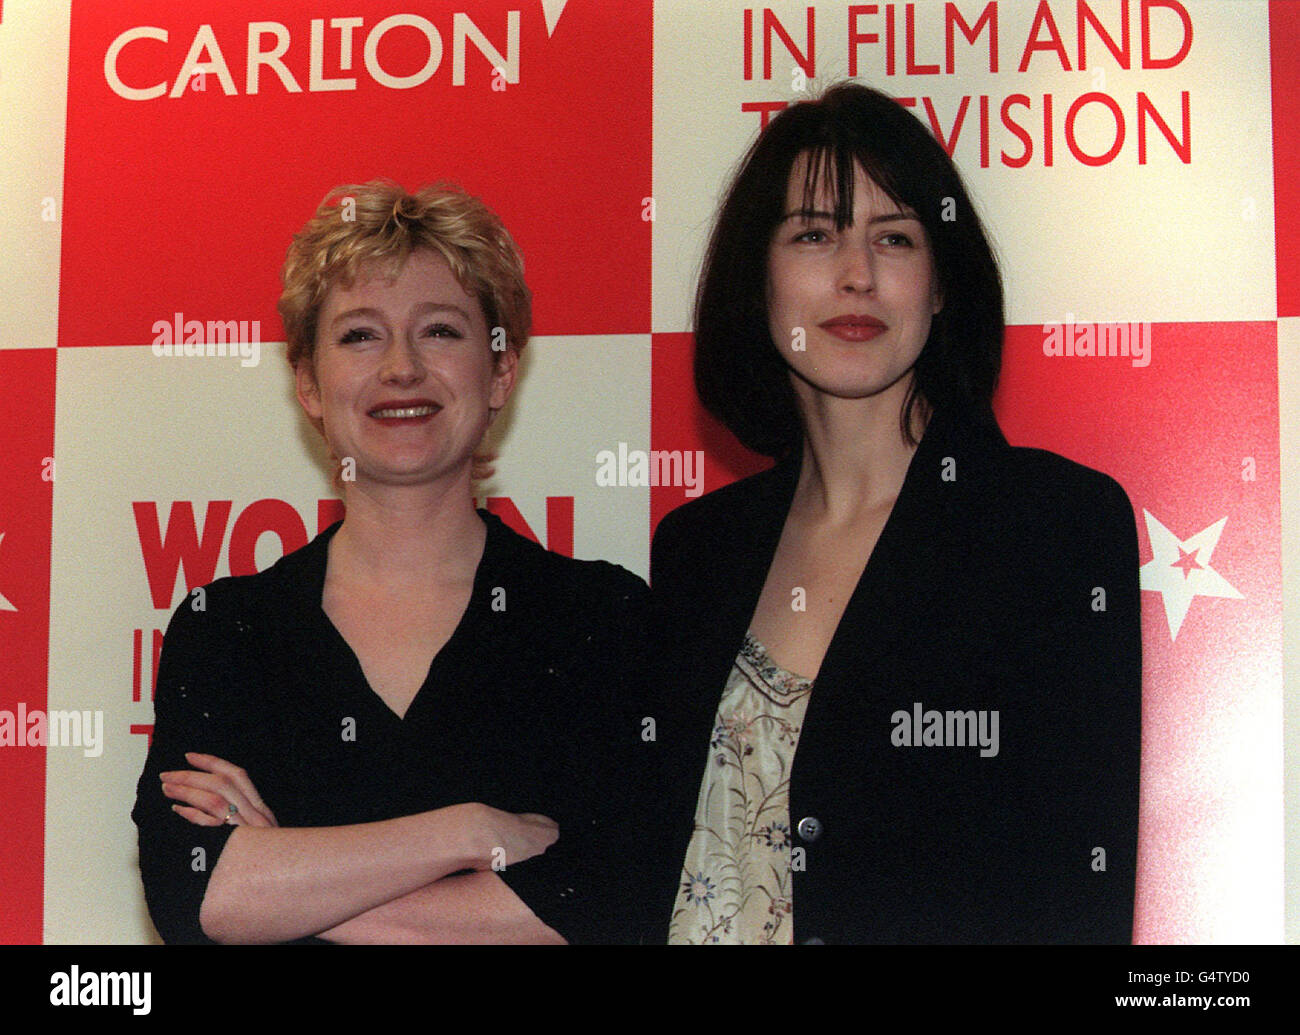 Actresses Zara Turner (L) and Gina McKee at the 9th Carlton Women in Film  and Television Awards luncheon, in London, where they presented awards. The  award ceremony pays tribute to the film